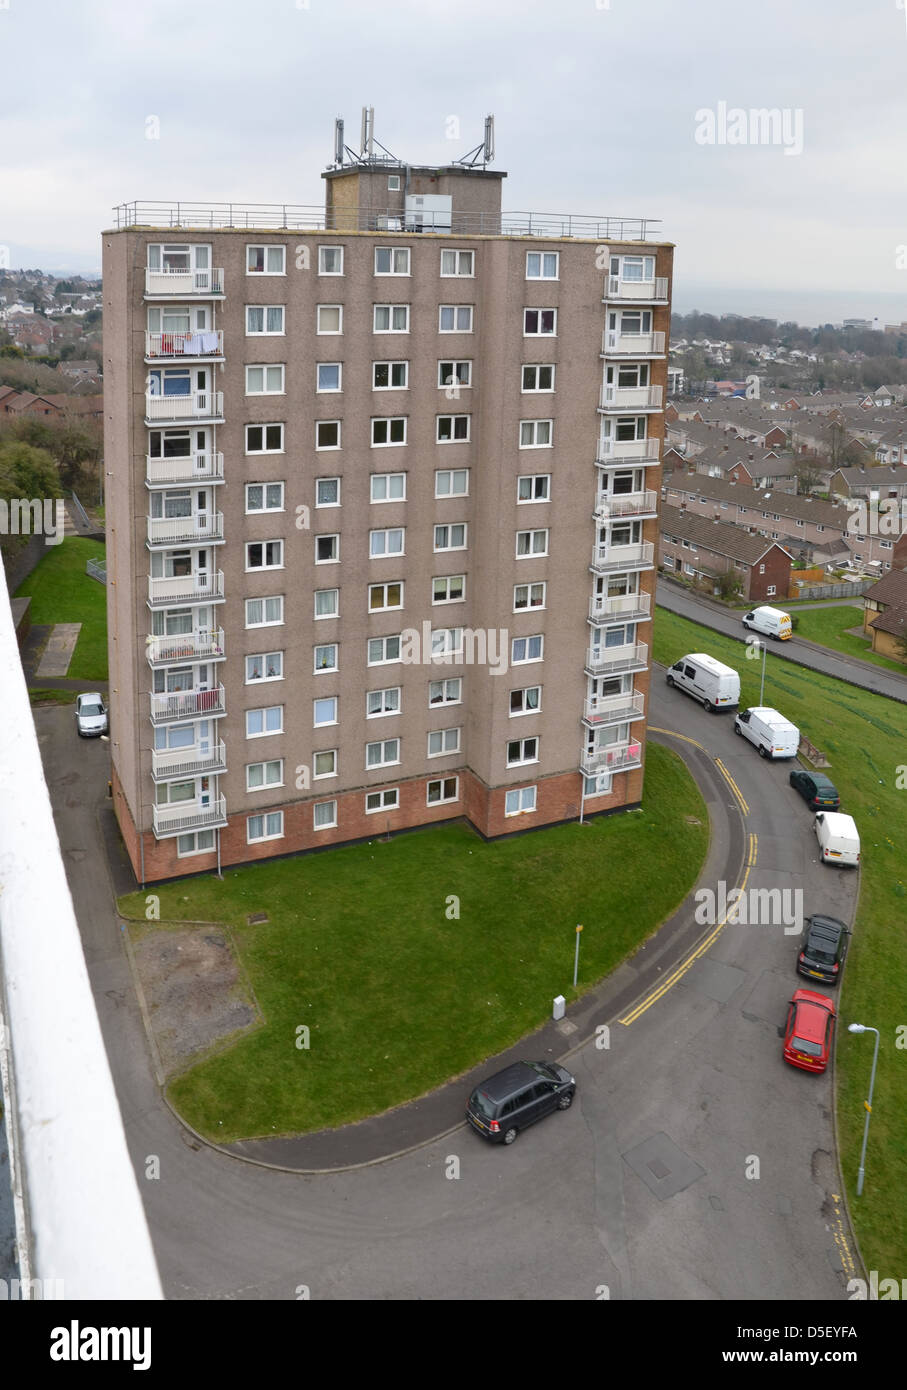 Flats at Clyne Park Swansea prior to refurbishment number 3288 Stock Photo